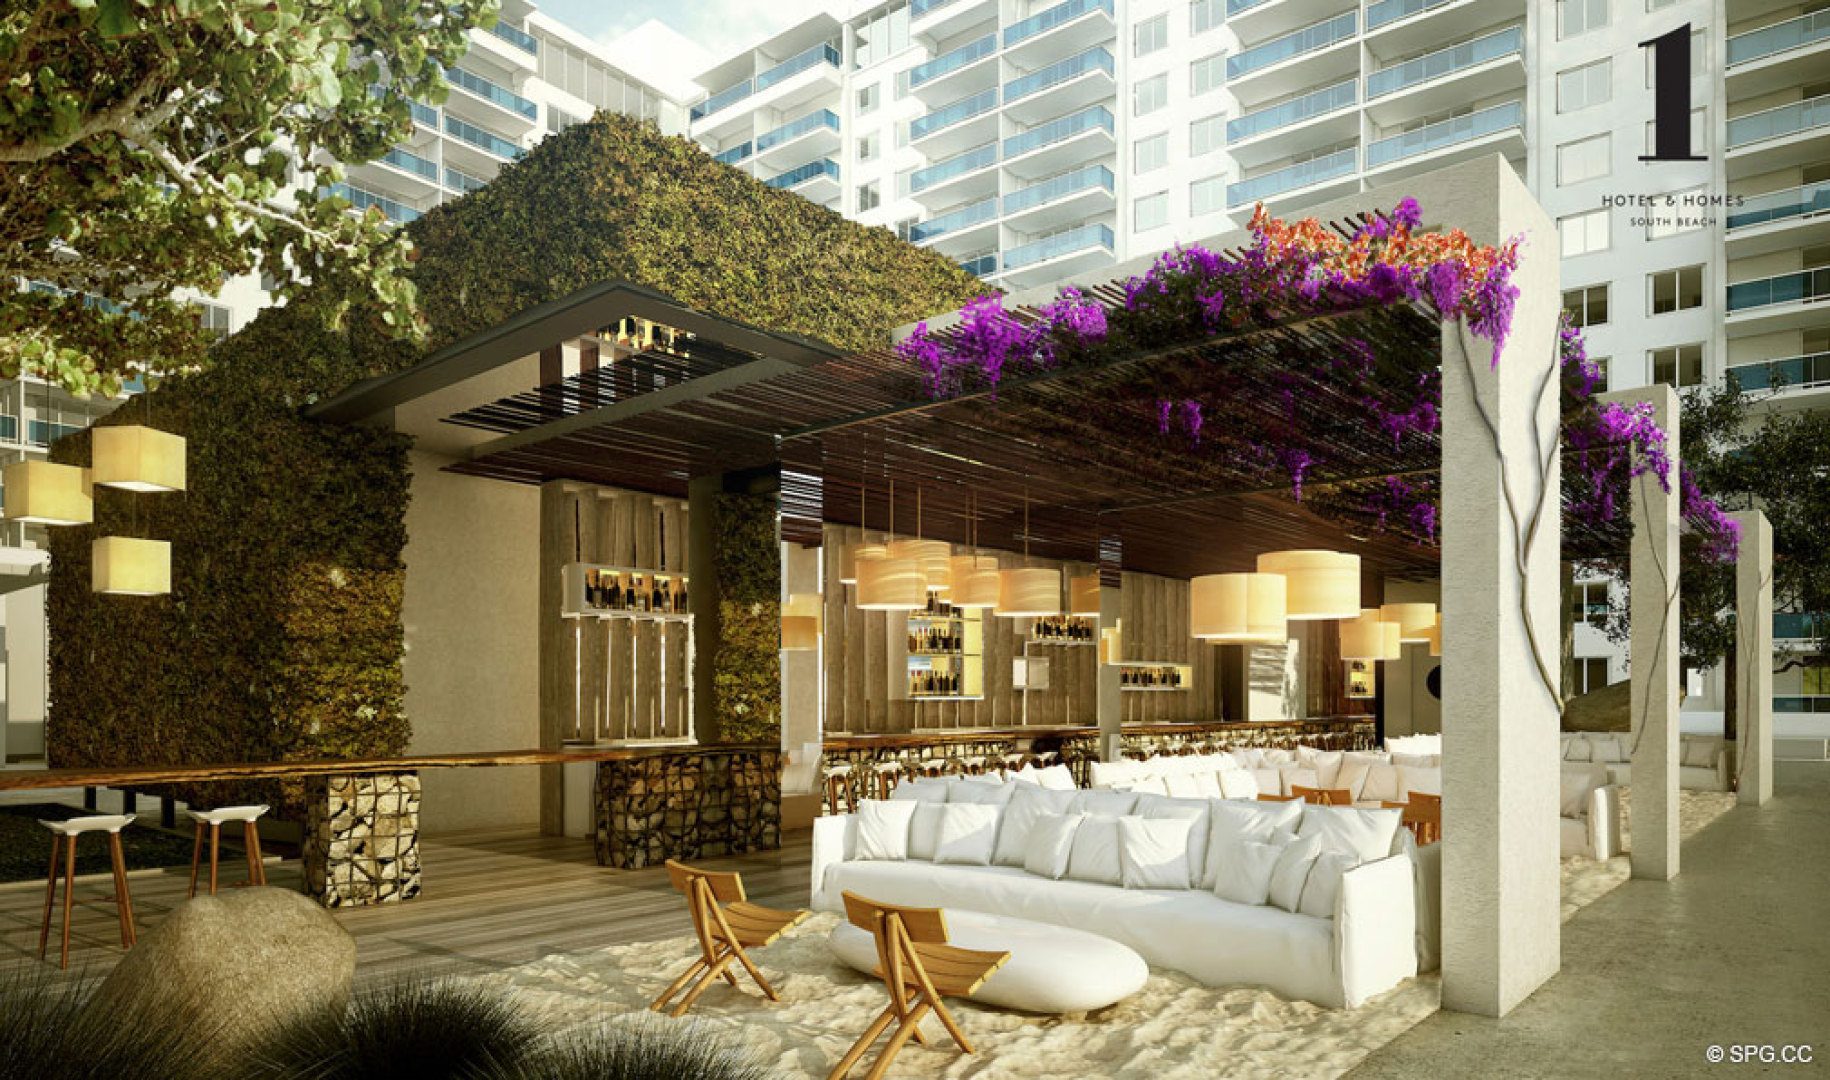 Poolside Restaurant at 1 Hotel & Homes South Beach, Luxury Oceanfront Condominiums Located at 2399 Collins Ave, Miami Beach, FL 33139